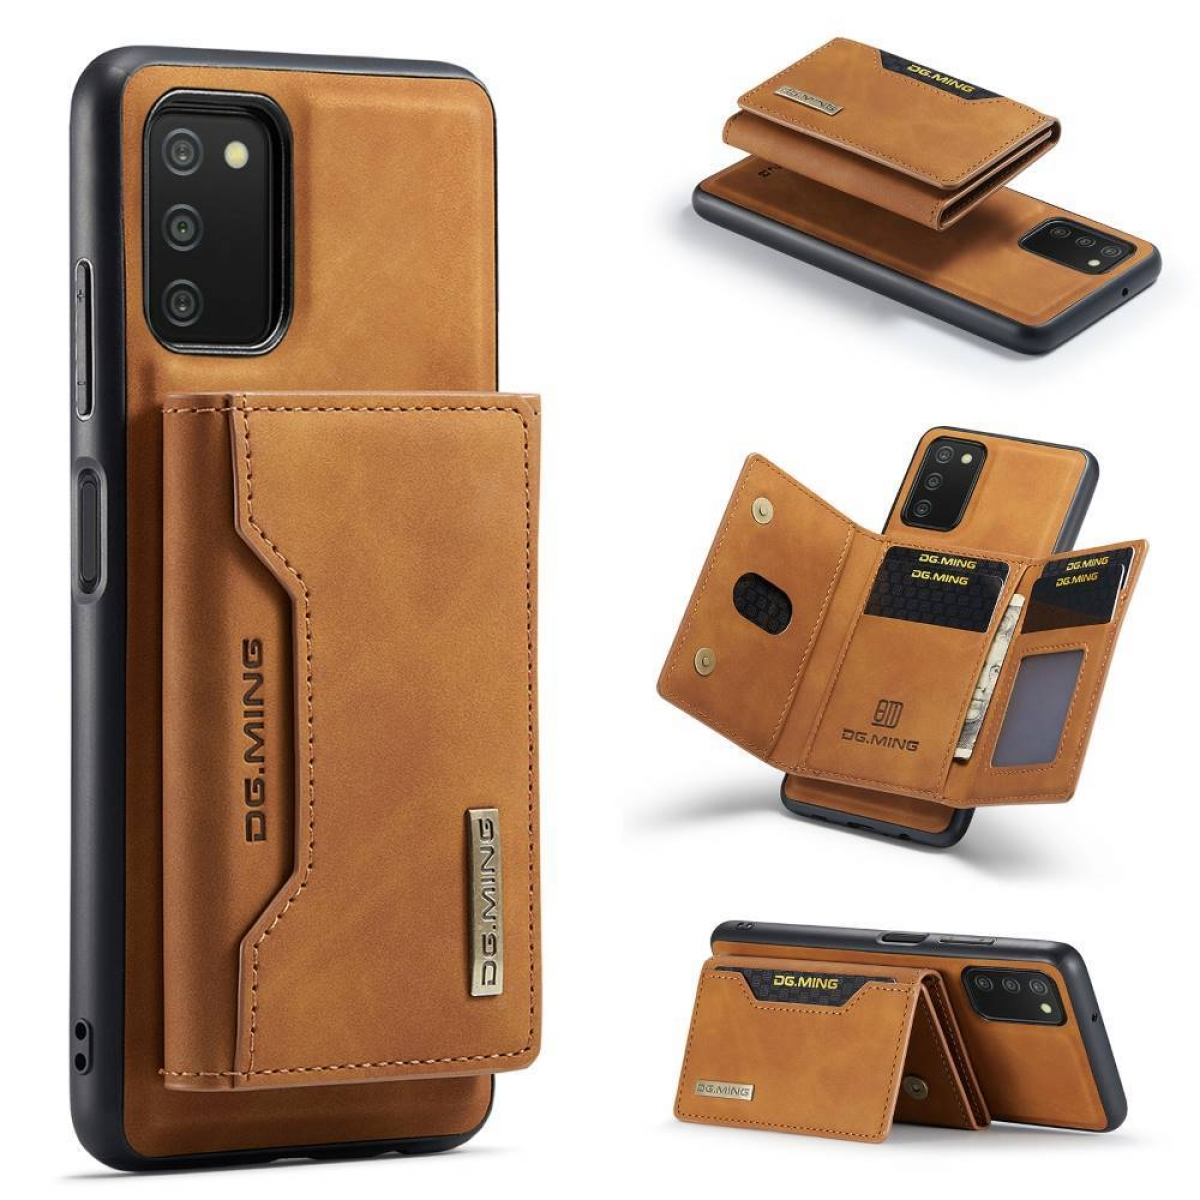 A03s, Samsung, Backcover, Braun DG 2in1, M2 MING Galaxy